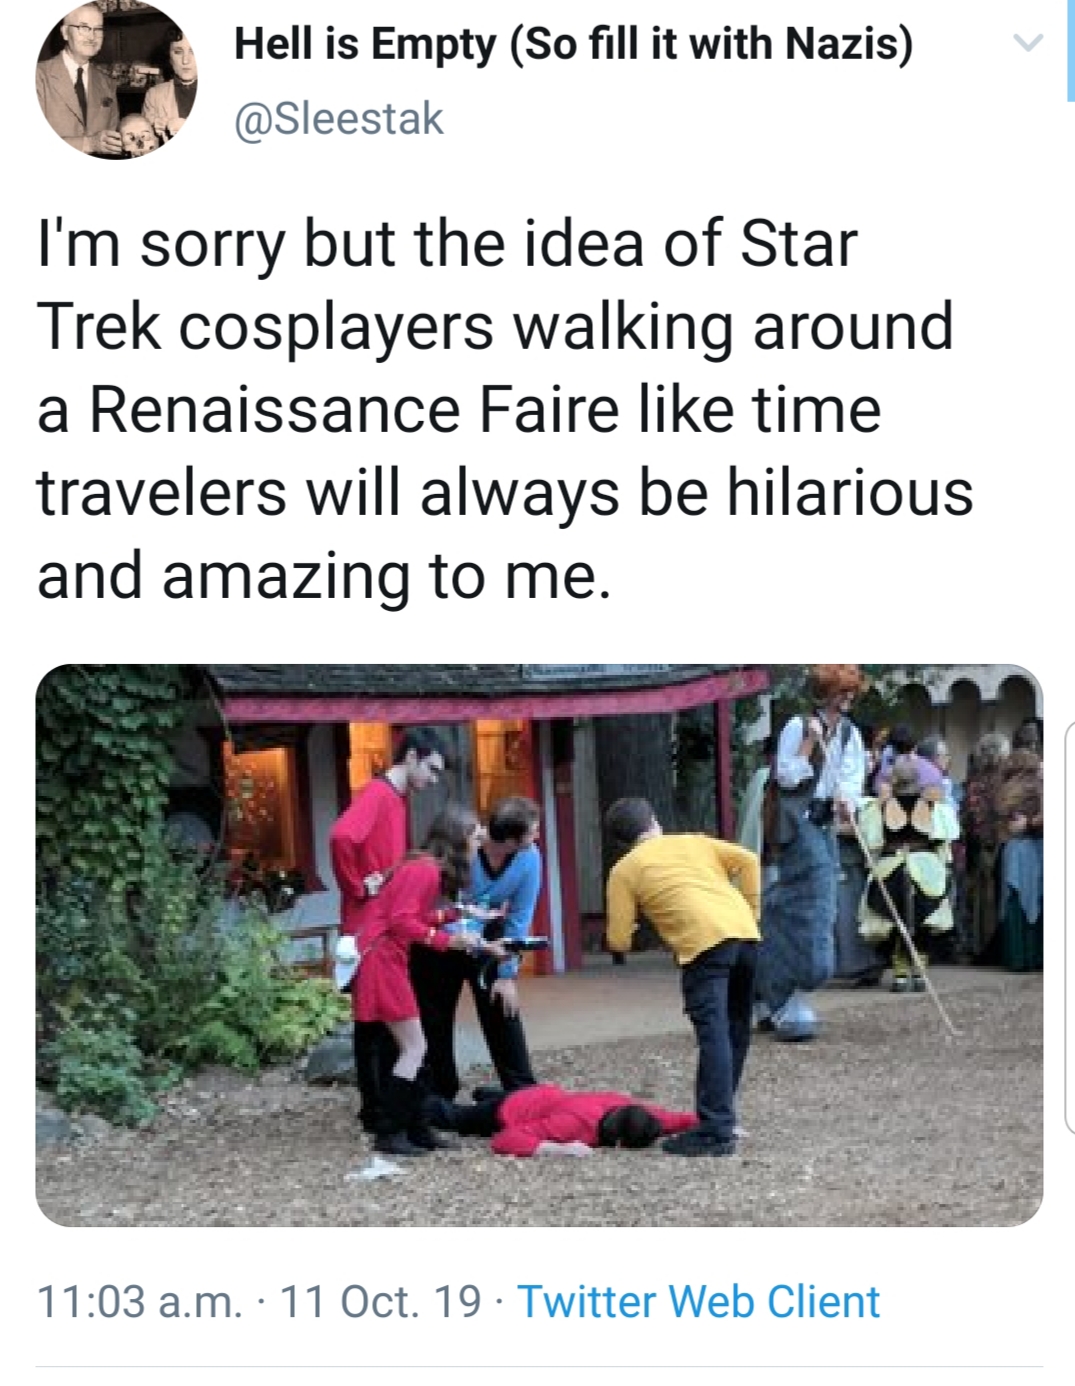 funny pics and memes - funny star trek - Hell is Empty So fill it with Nazis I'm sorry but the idea of Star Trek cosplayers walking around a Renaissance Faire time travelers will always be hilarious and amazing to me. a.m. 11 Oct. 19 Twitter Web Client